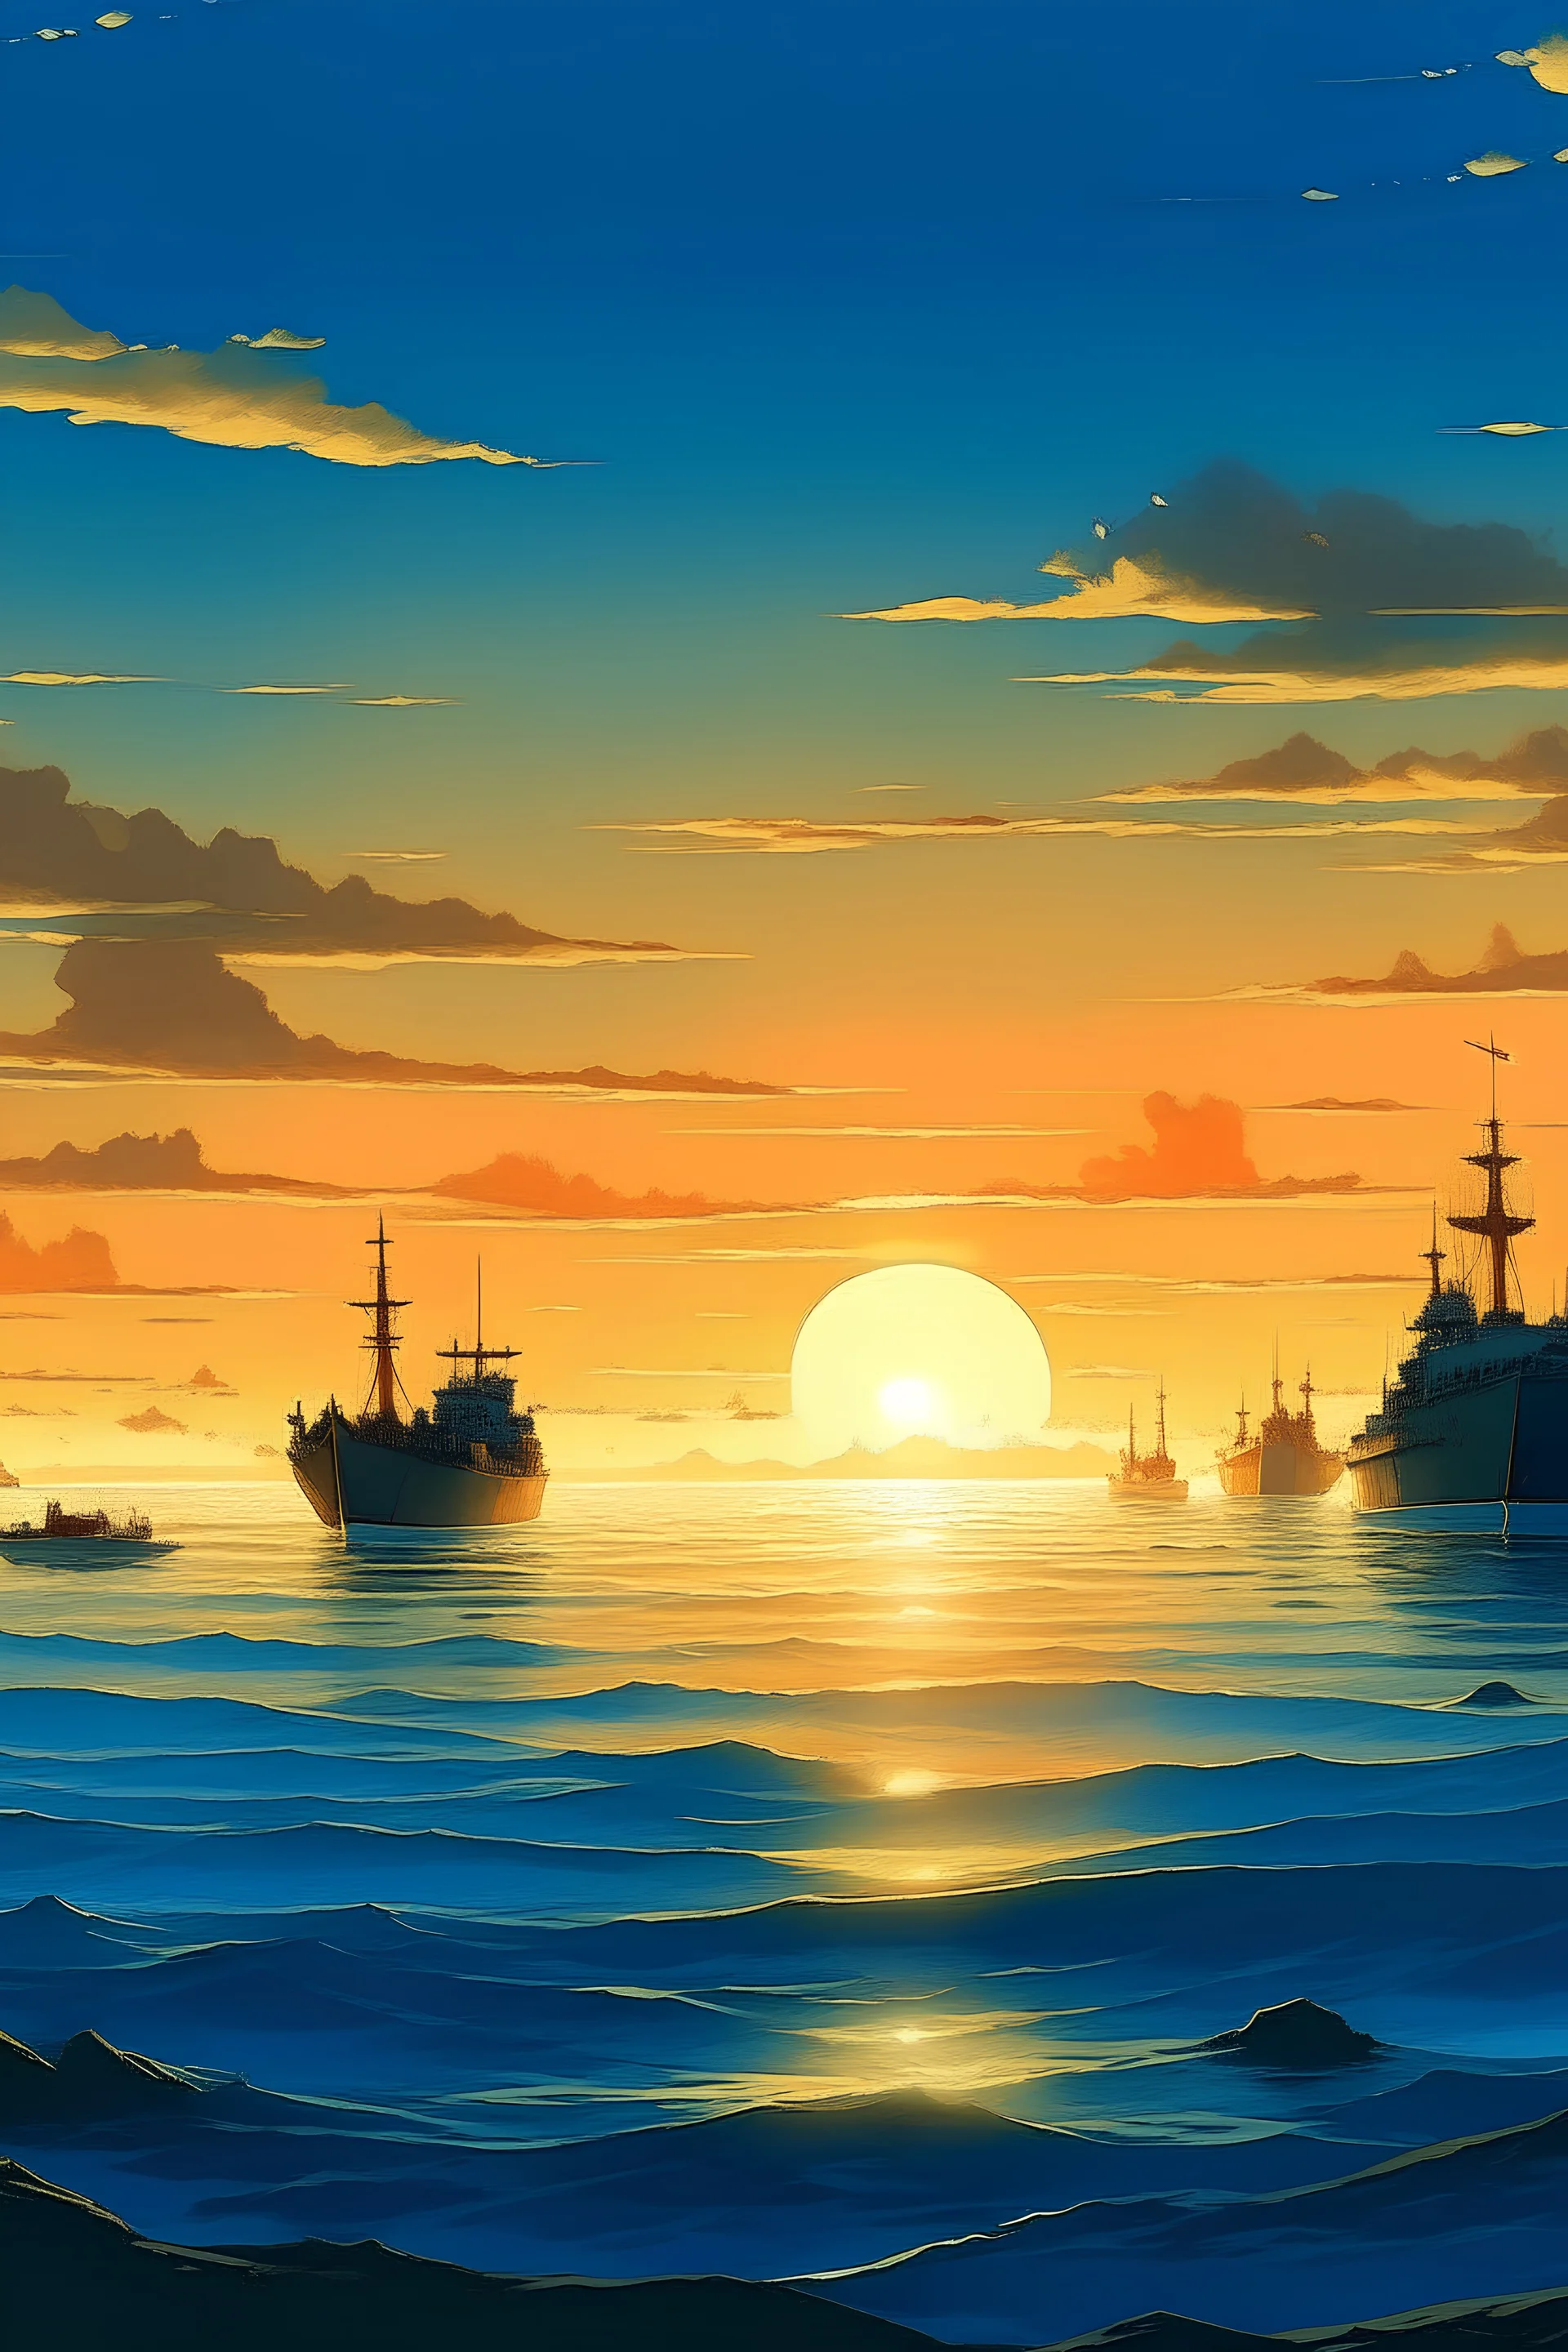 I want an image depicting a seascape with a sunset, a blue sky, and ships visible along the seaside. image size 1600 x 700 in a reality